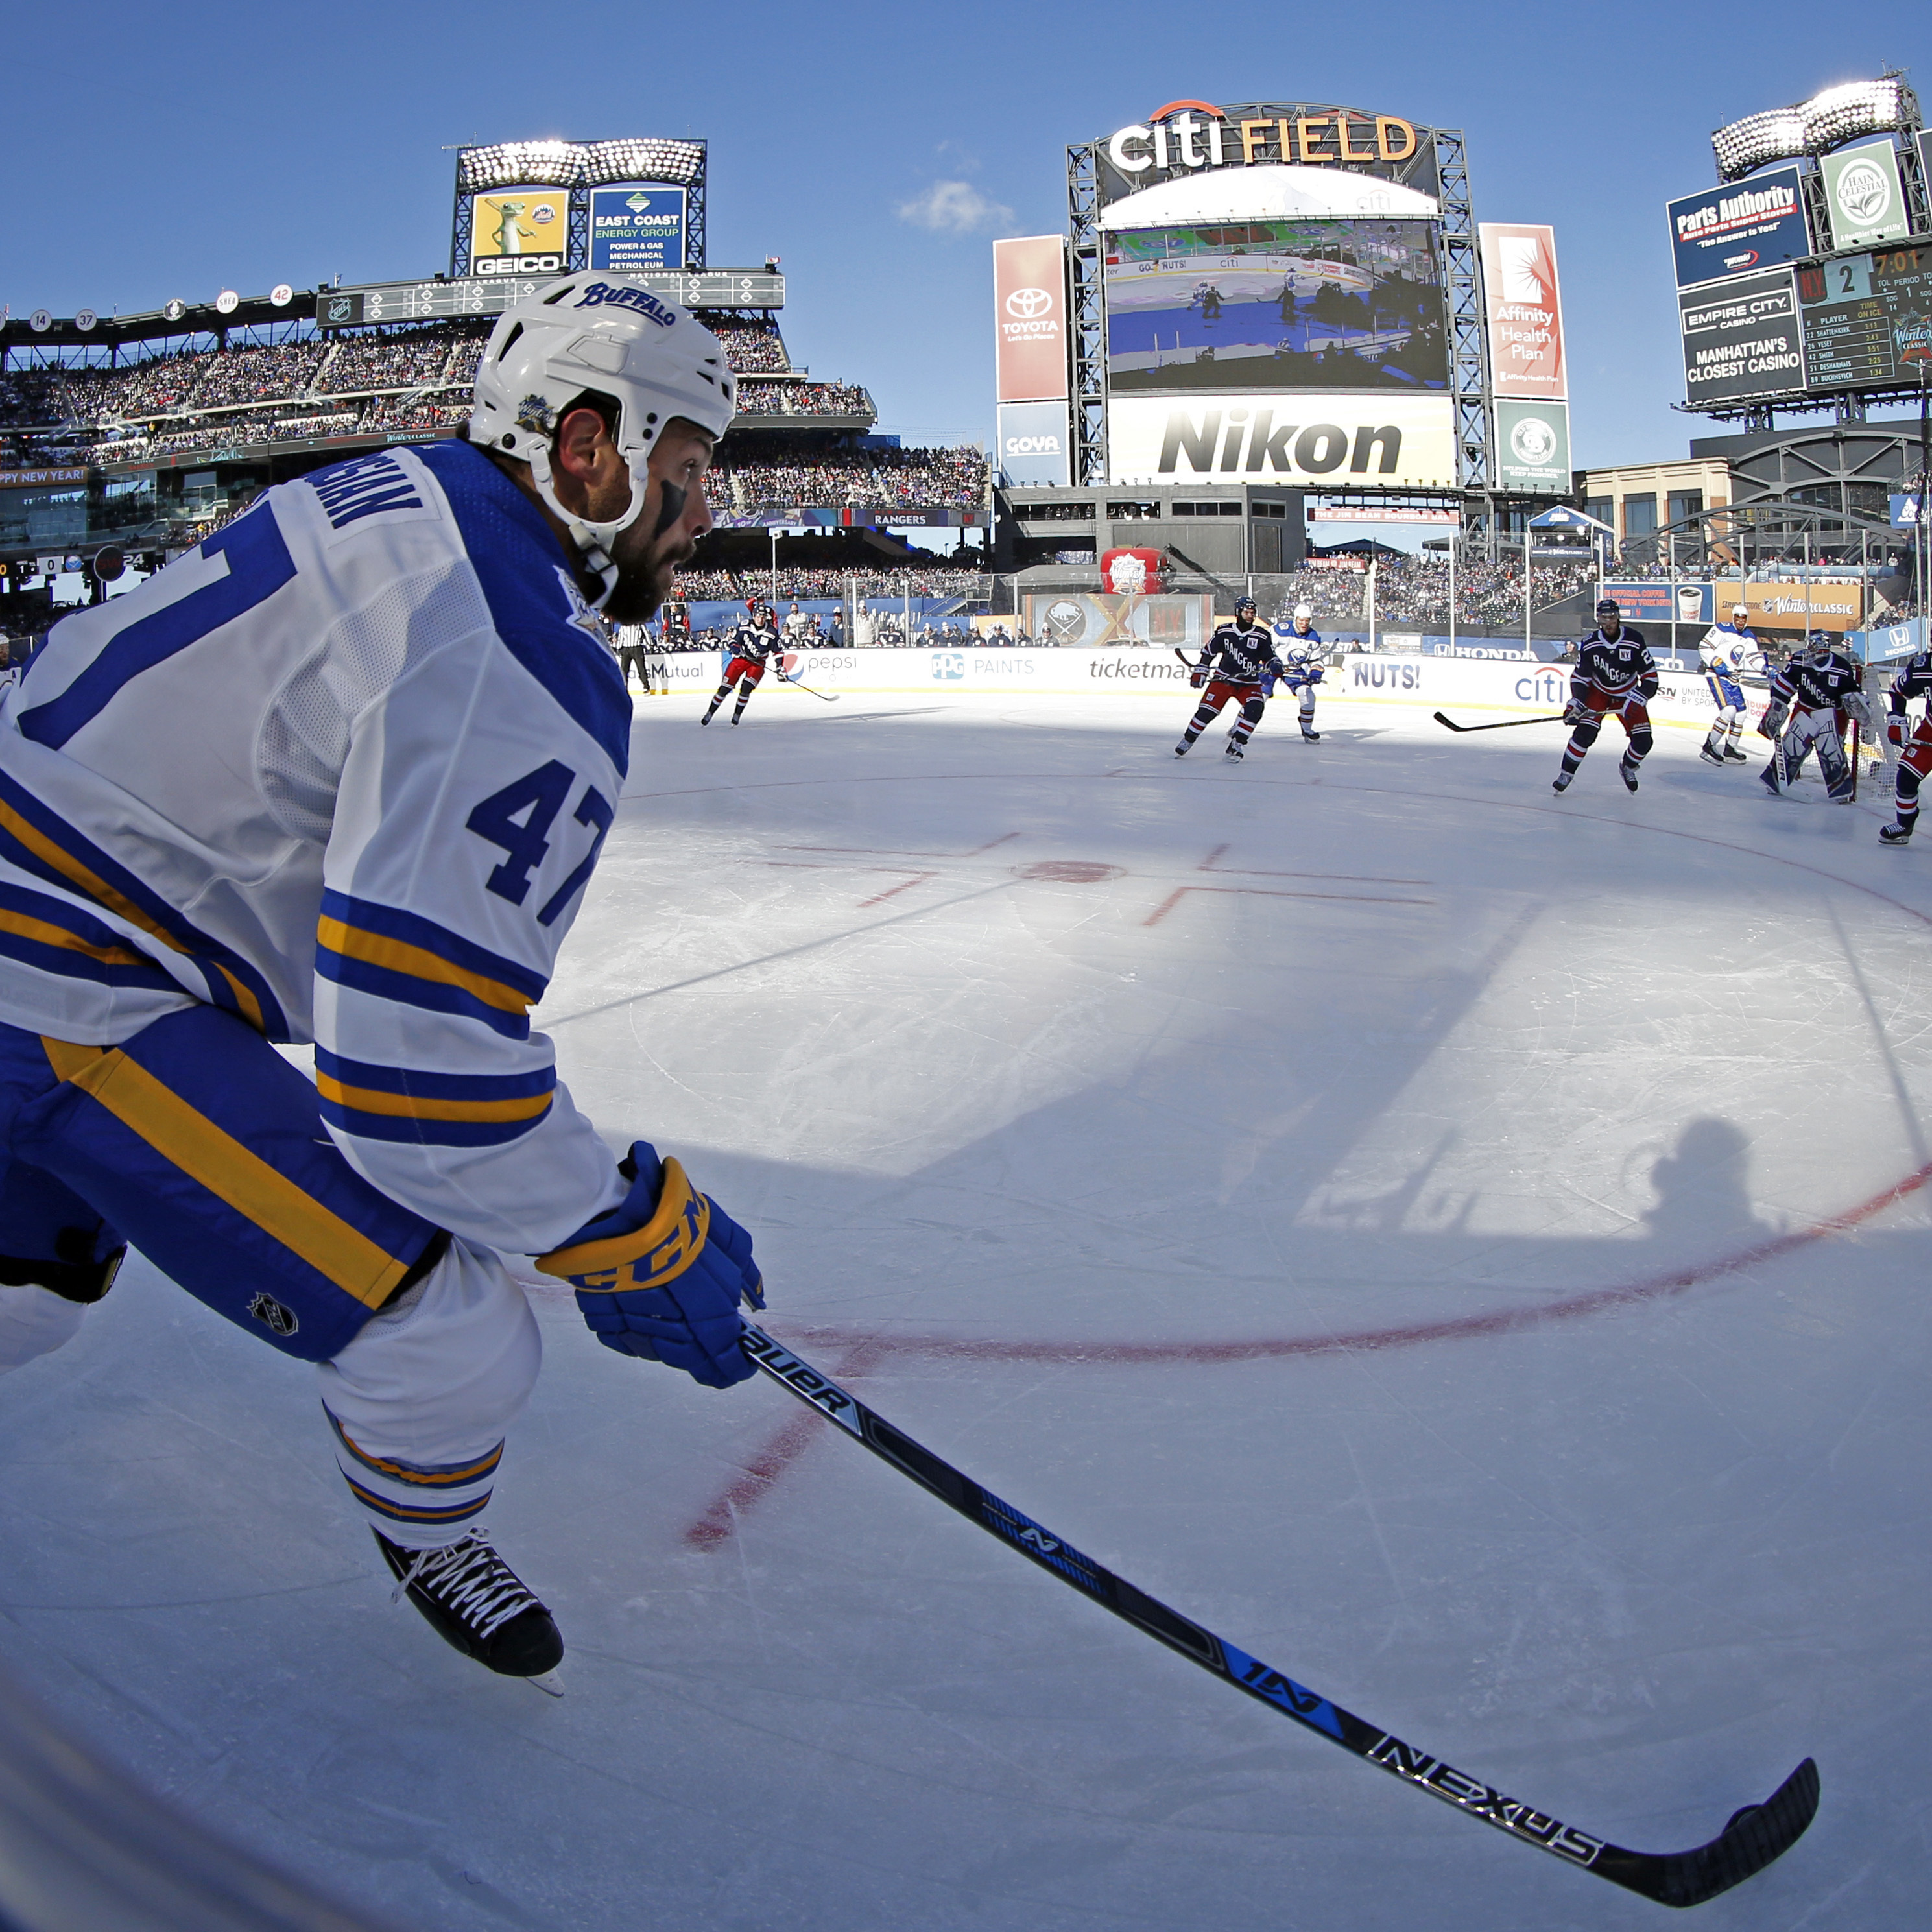 It's Official: The Buffalo Sabres Are Playing an Outdoor Game This Season